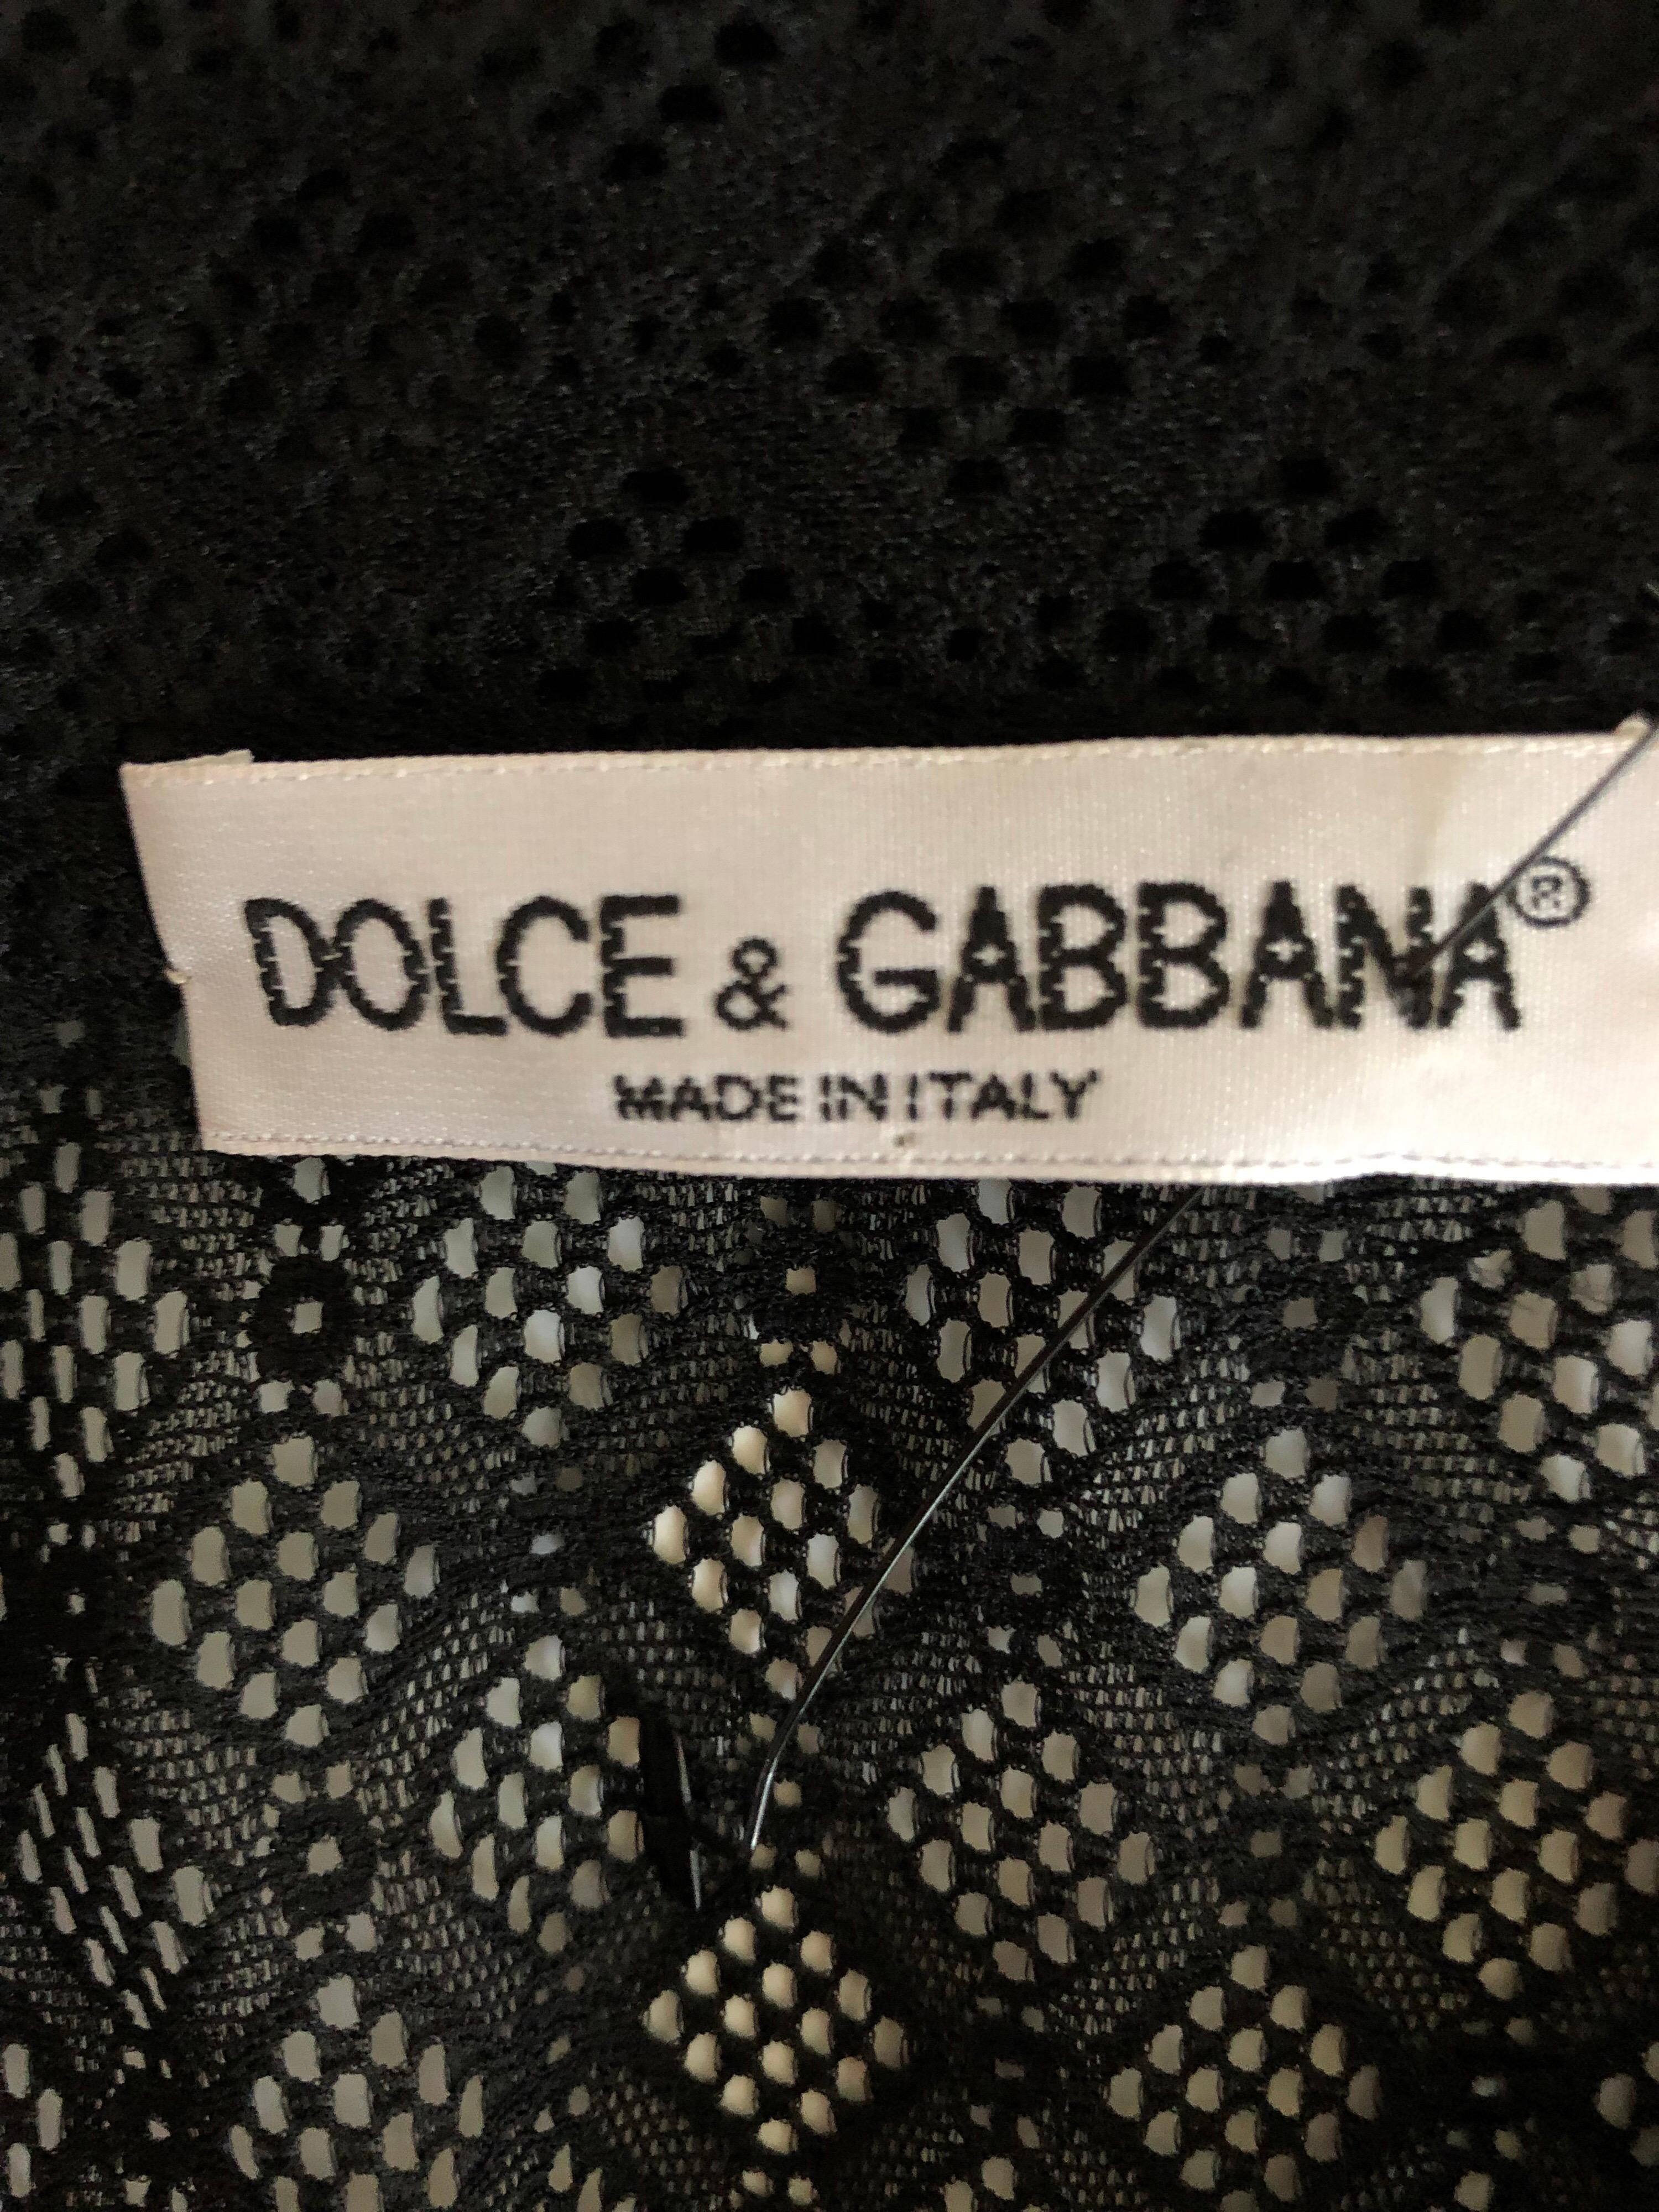 Dolce and Gabbana Vintage Sheer Mesh Lace Eyelet Button-Up Black Top ...